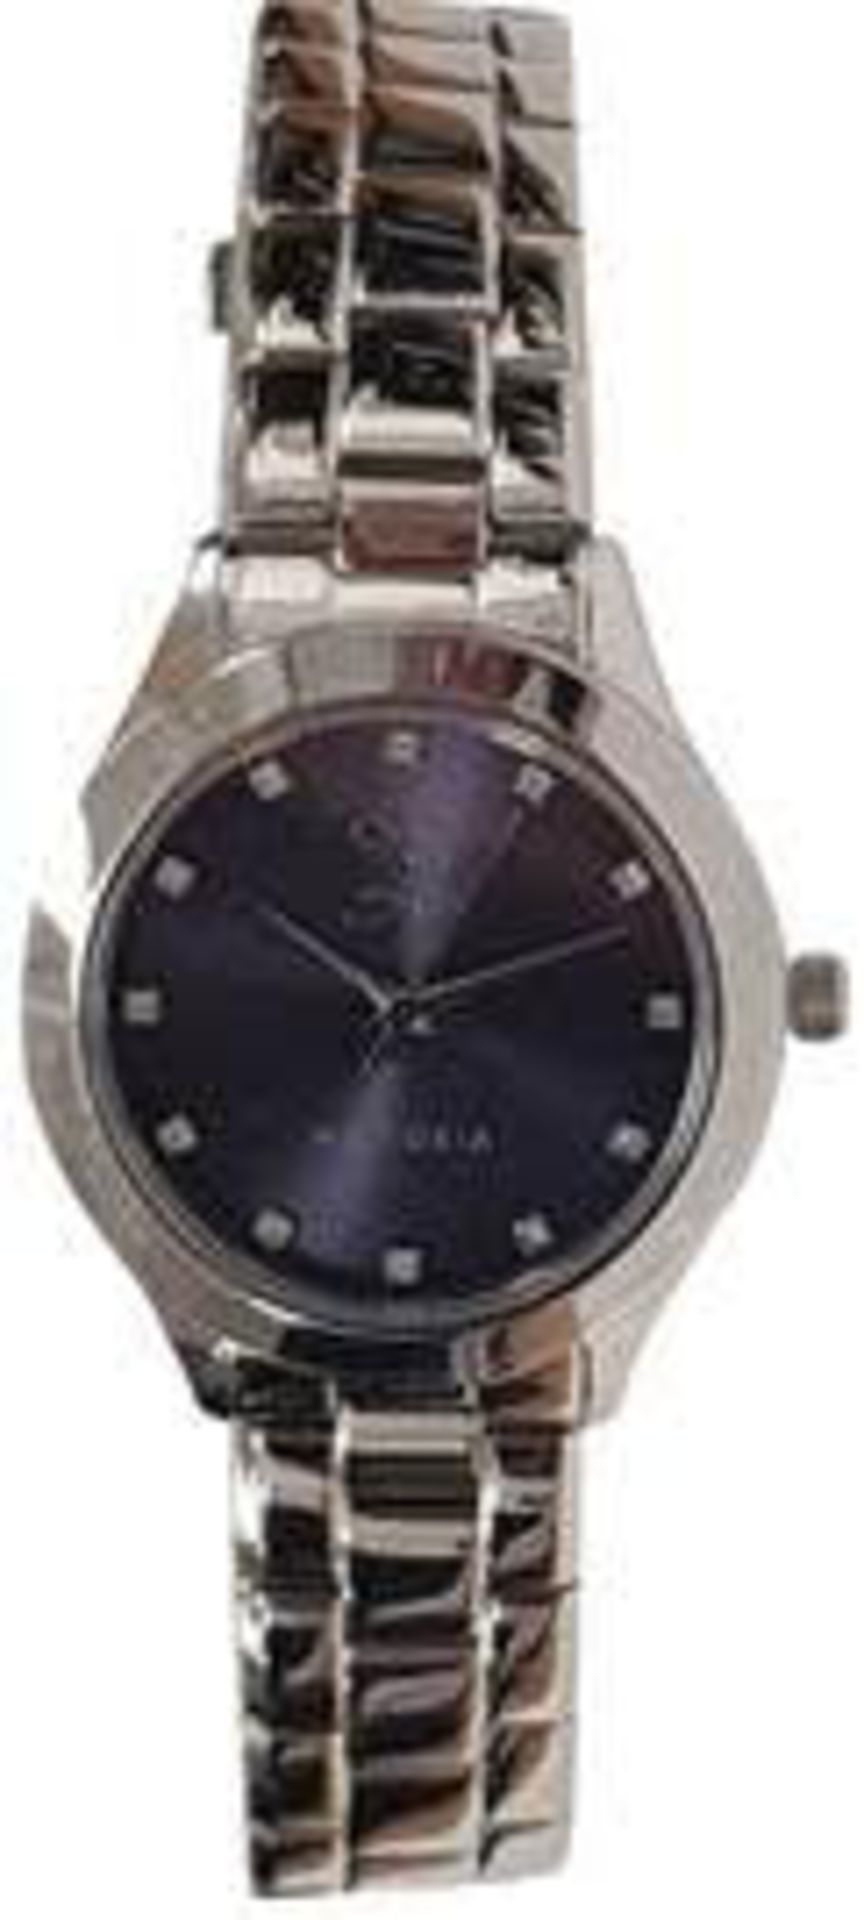 + VAT Brand New Ladies Victoria Stainless Steel Watch With Bracelet Strap - Navy Face - Silver